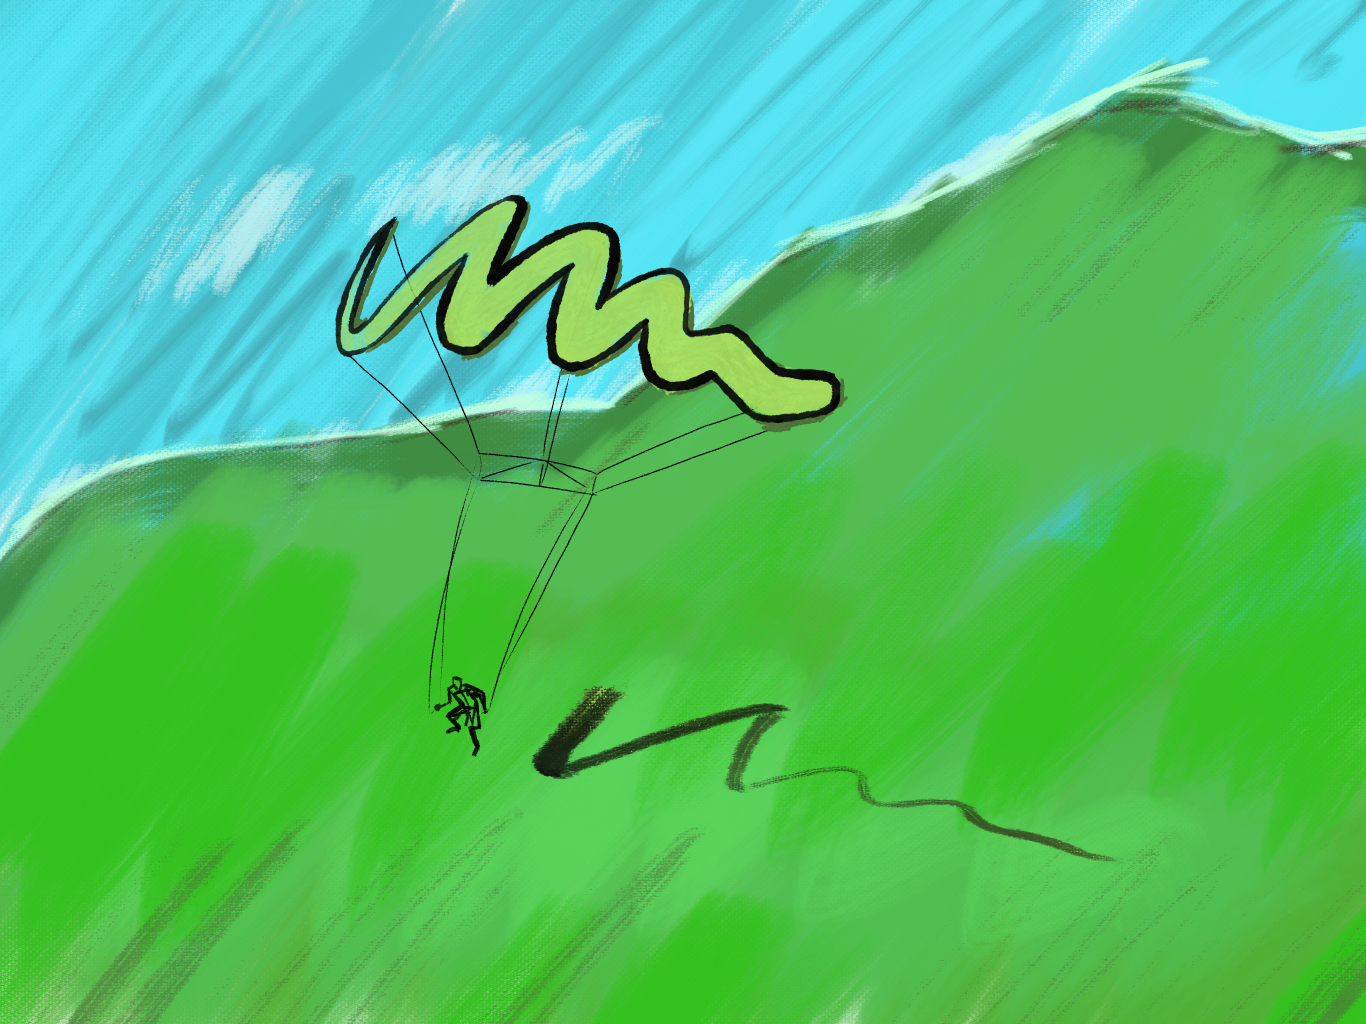 an illustration of a green scribble forming a kite, flown by a person across a large green mountain backed by blue sky